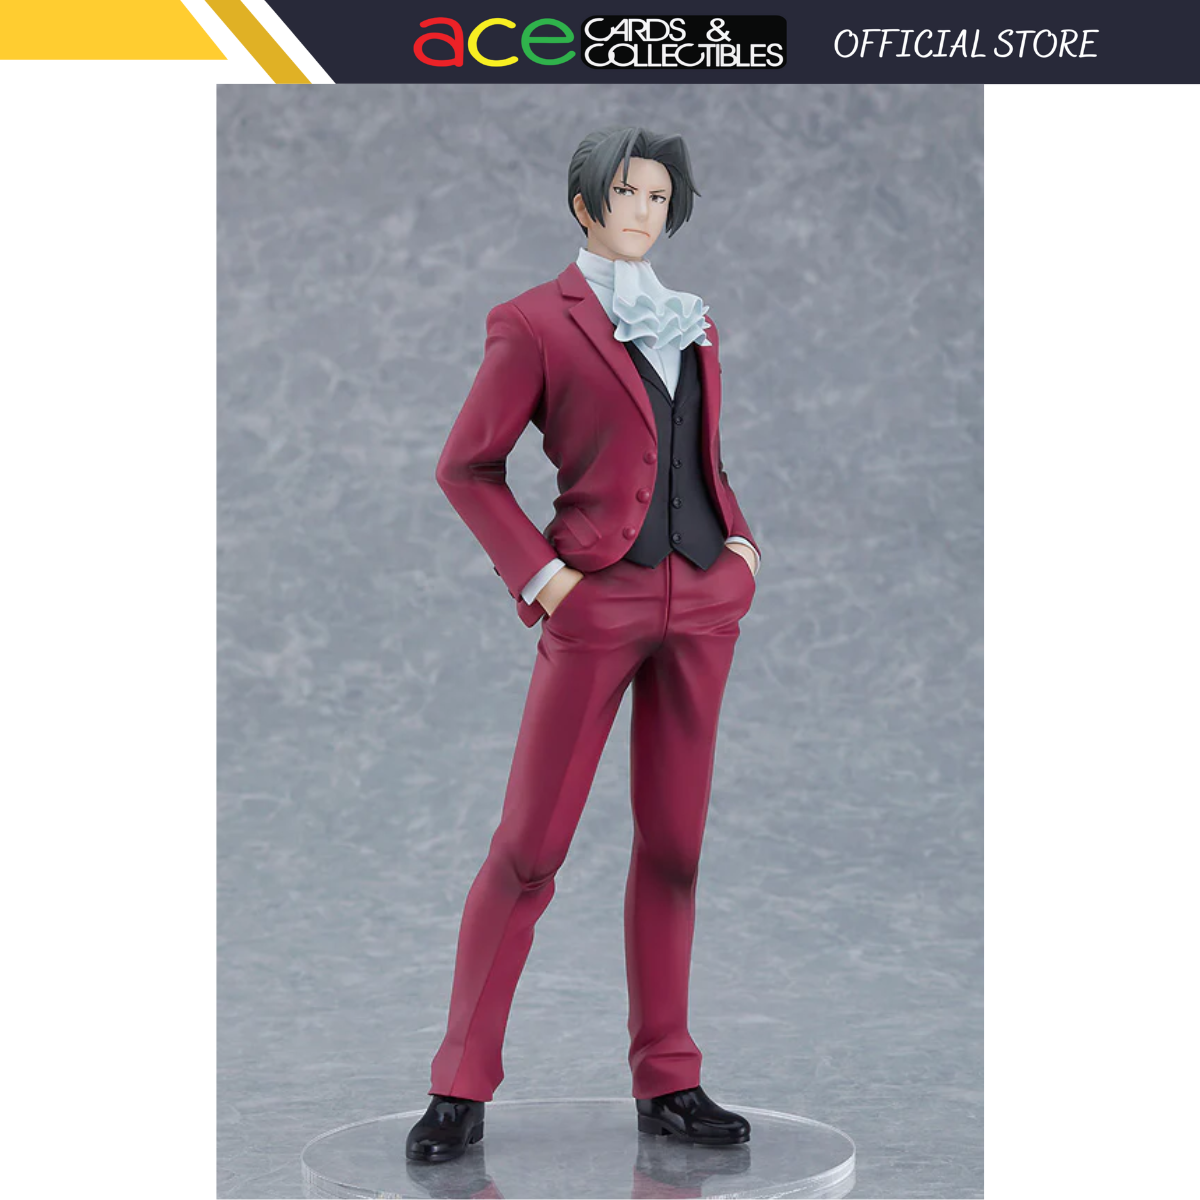 Phoenix Wright: Ace Attorney Pop Up Parade "Miles Edgeworth"-Good Smile Company-Ace Cards & Collectibles